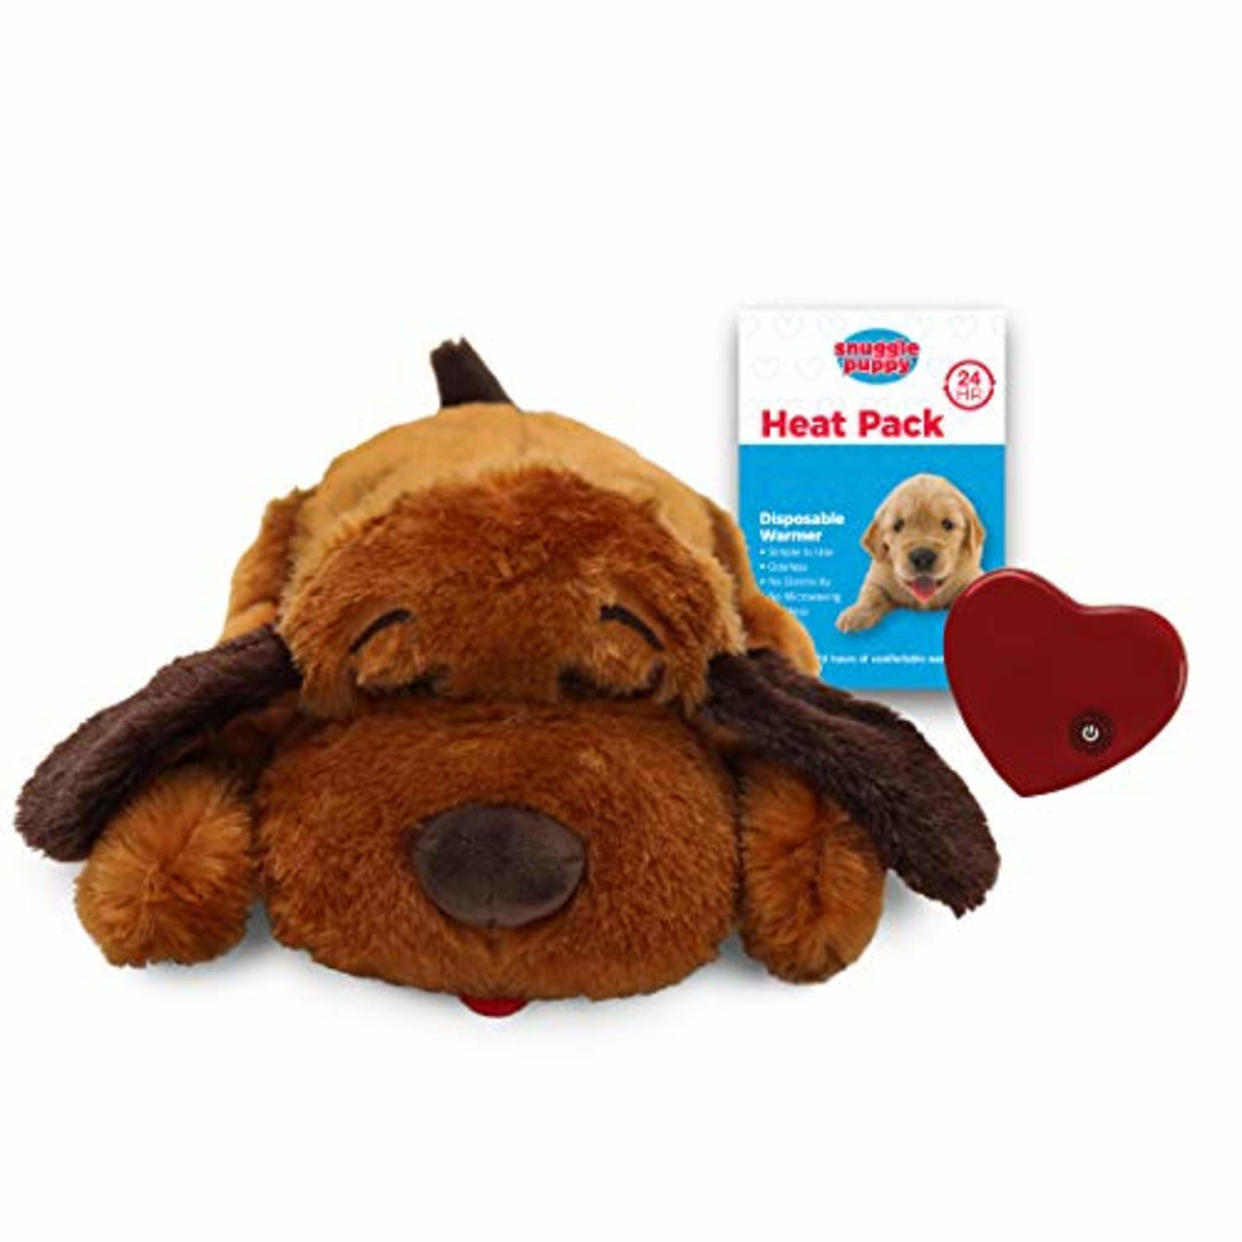 SmartPetLove Snuggle Puppy Behavioral Aid Toy is one of the best Valentine's Day pet gifts of 2021. (Amazon / Amazon)